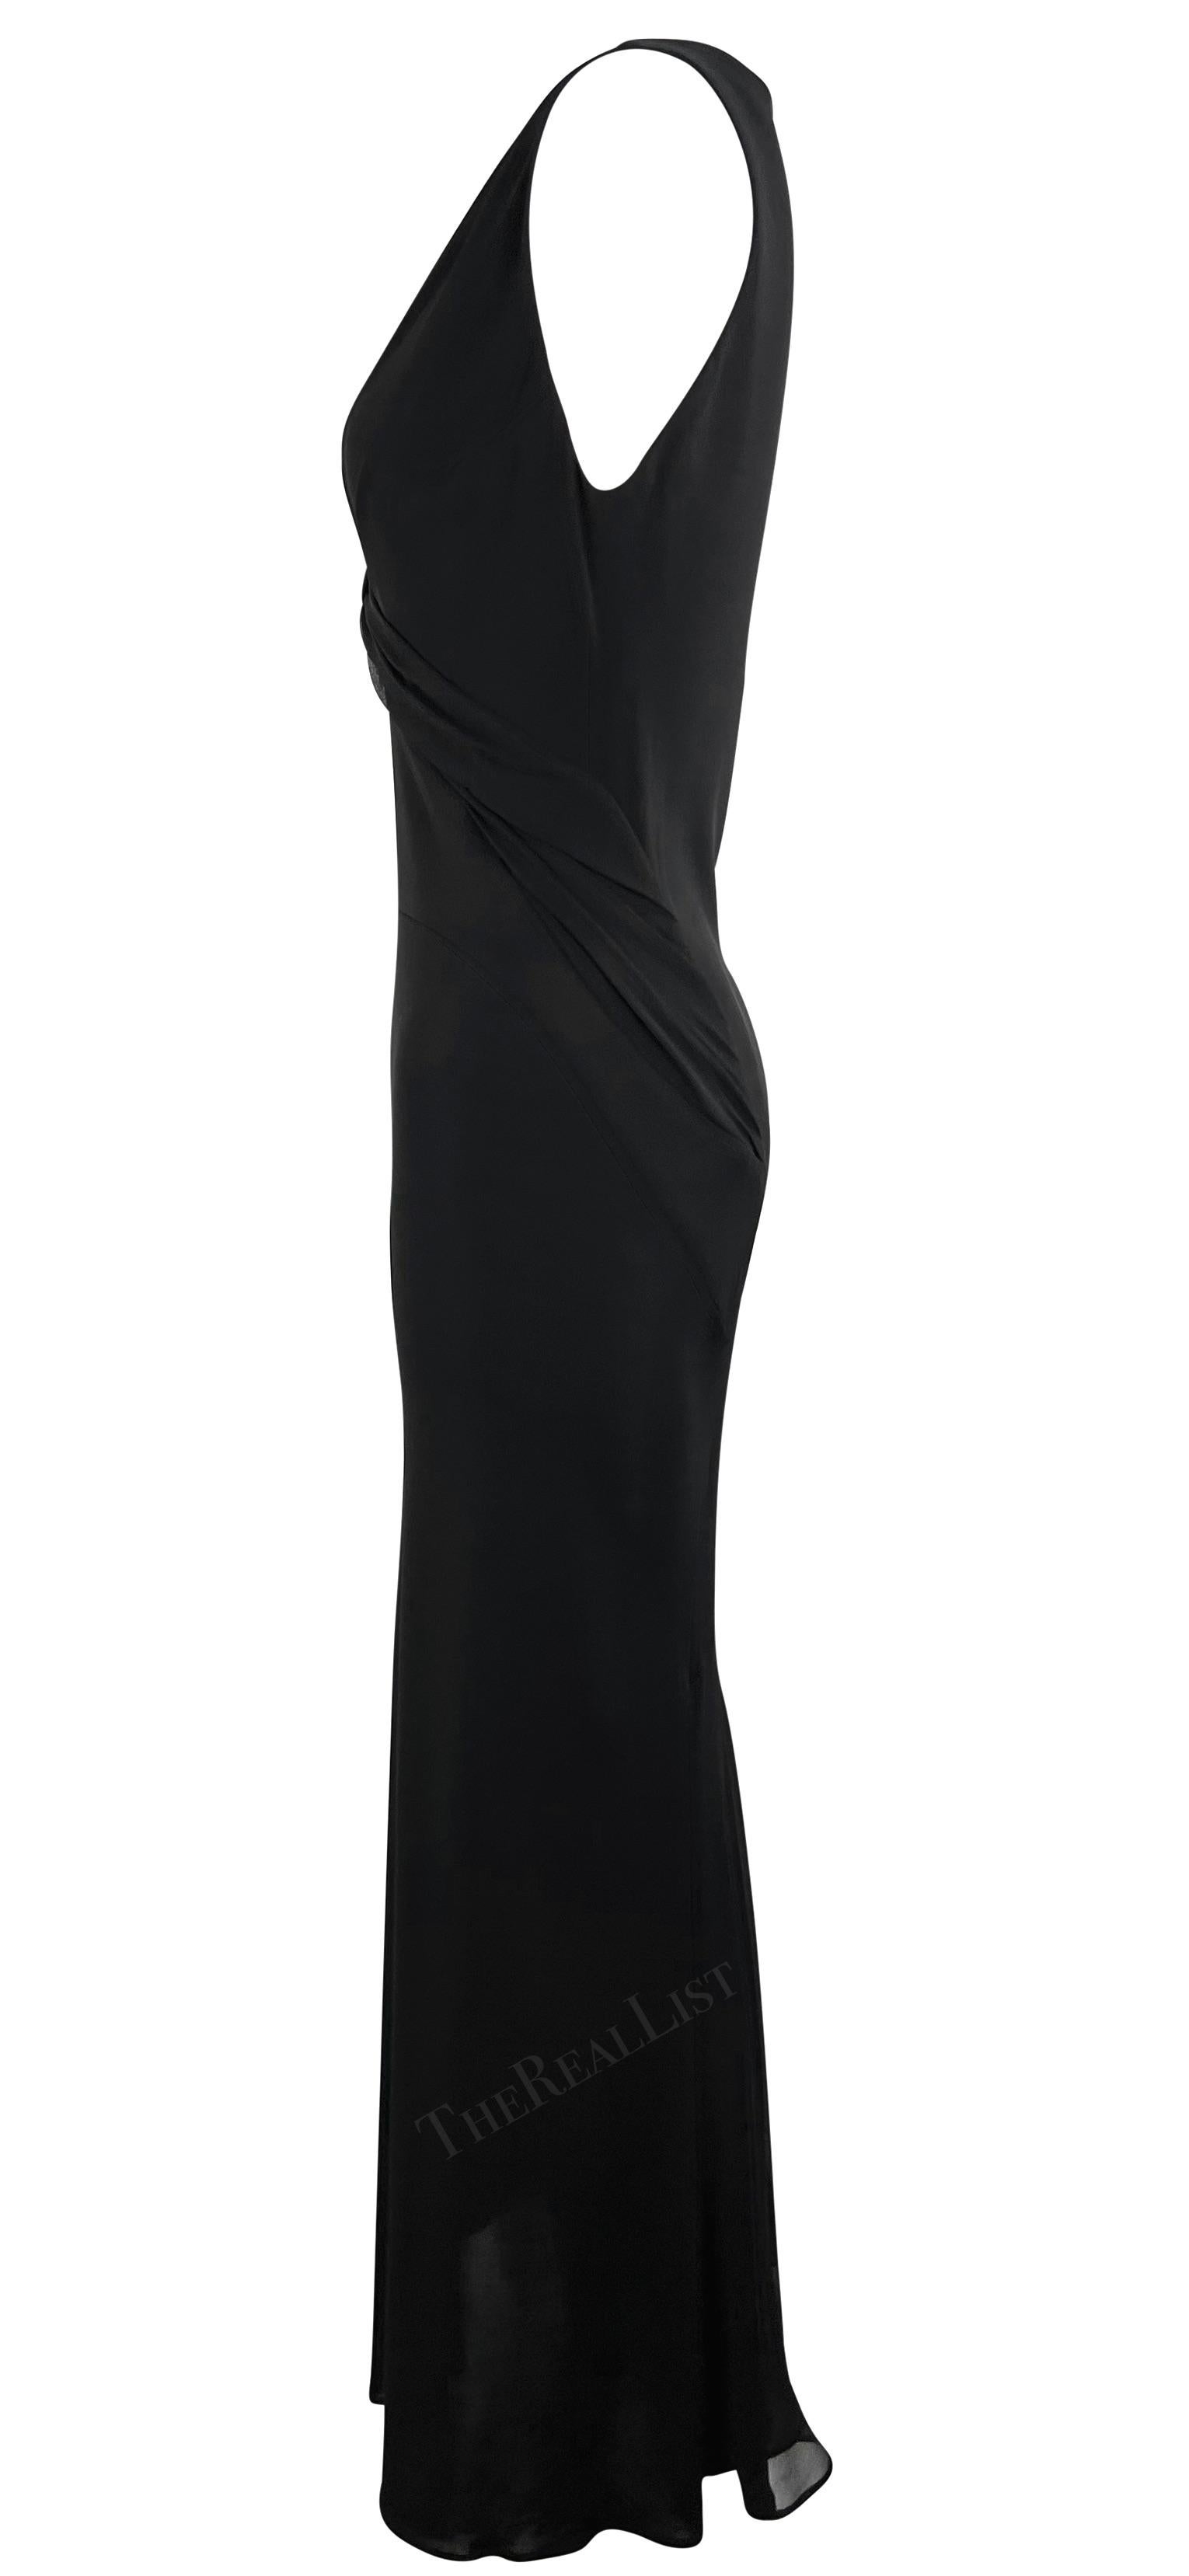 2000s Yigal Azrouël Semi-Sheer Black Bodycon Chiffon Trim Plunging  Gown In Excellent Condition For Sale In West Hollywood, CA